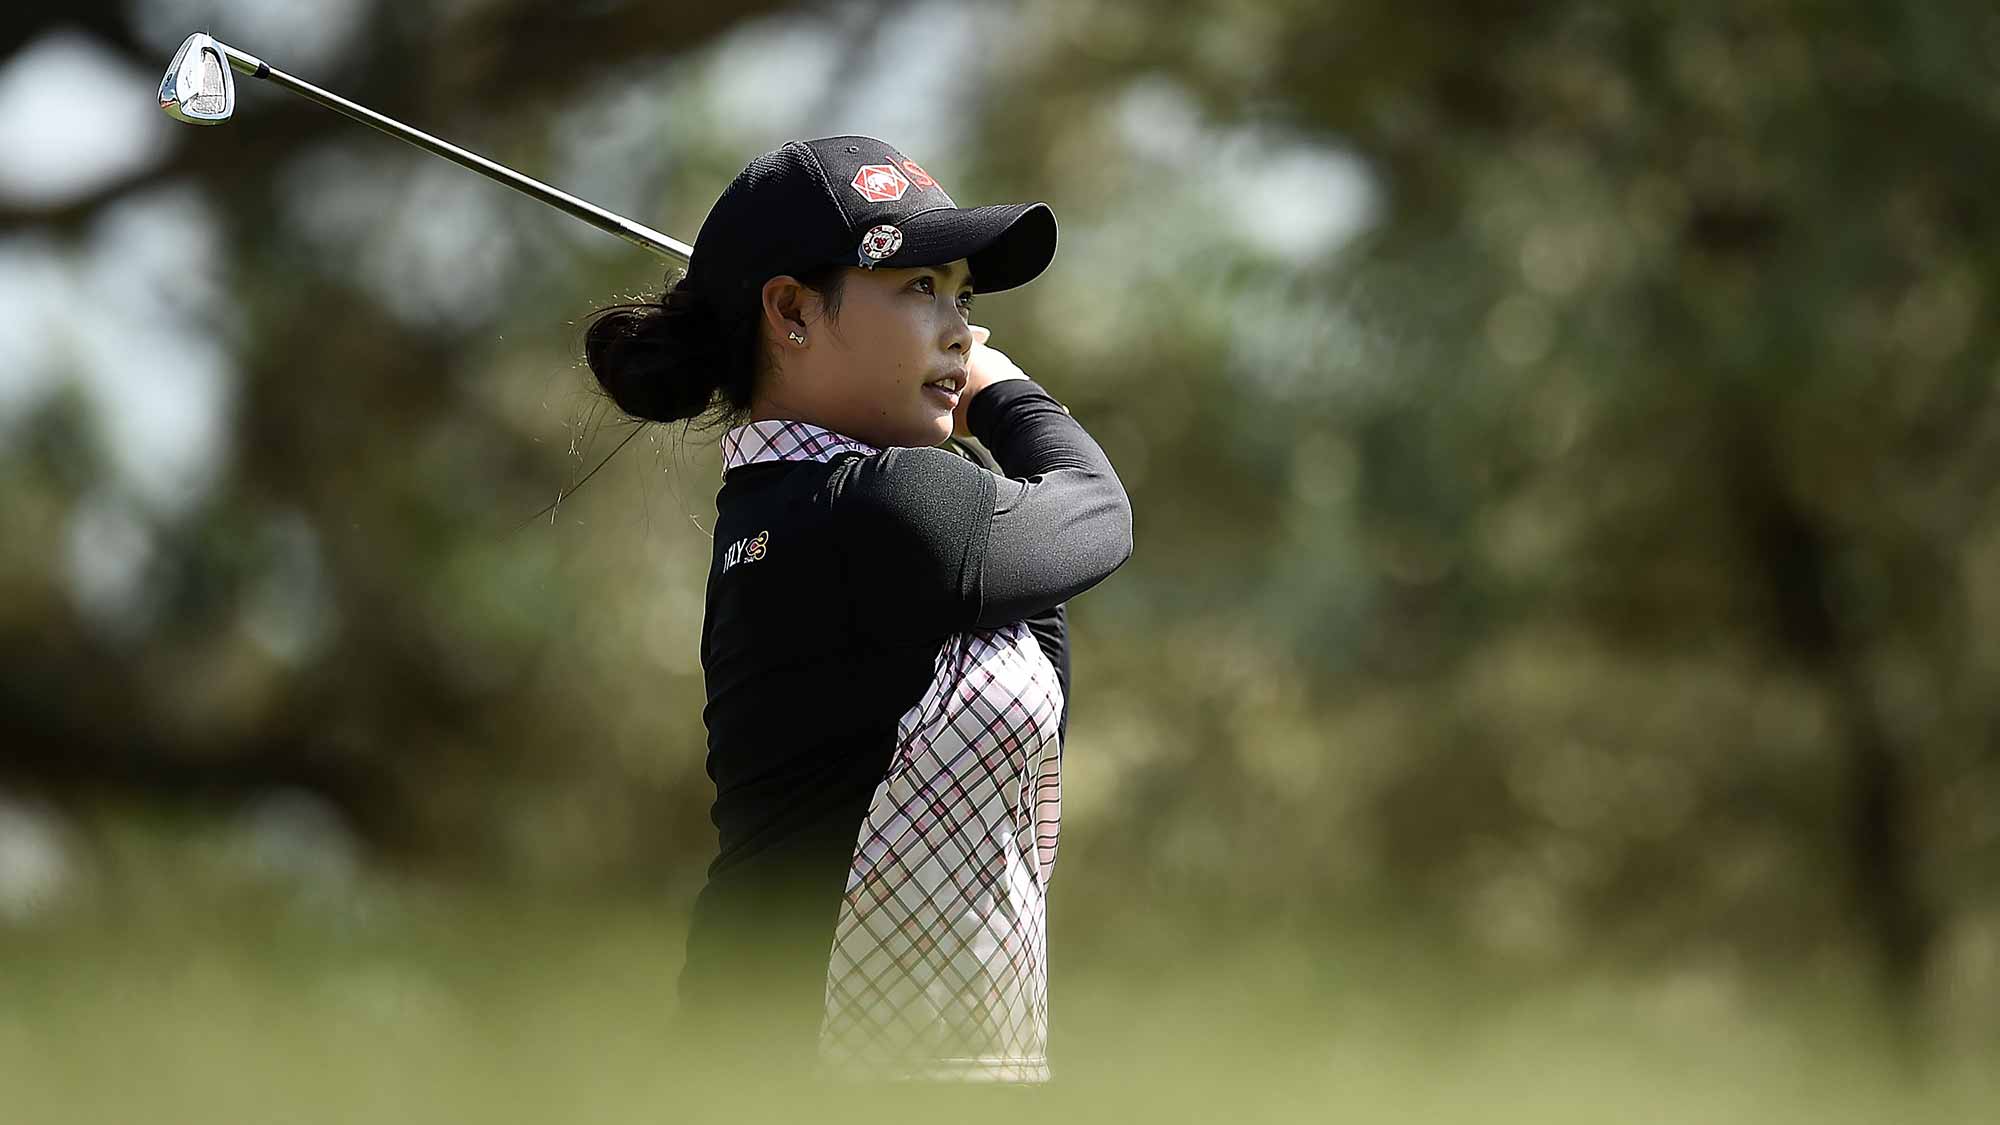 Moriya Jutanugarn of Thailand watches her tee shot on the 12th hole during the first round of the Meijer LPGA Classic at Blythefield Country Club